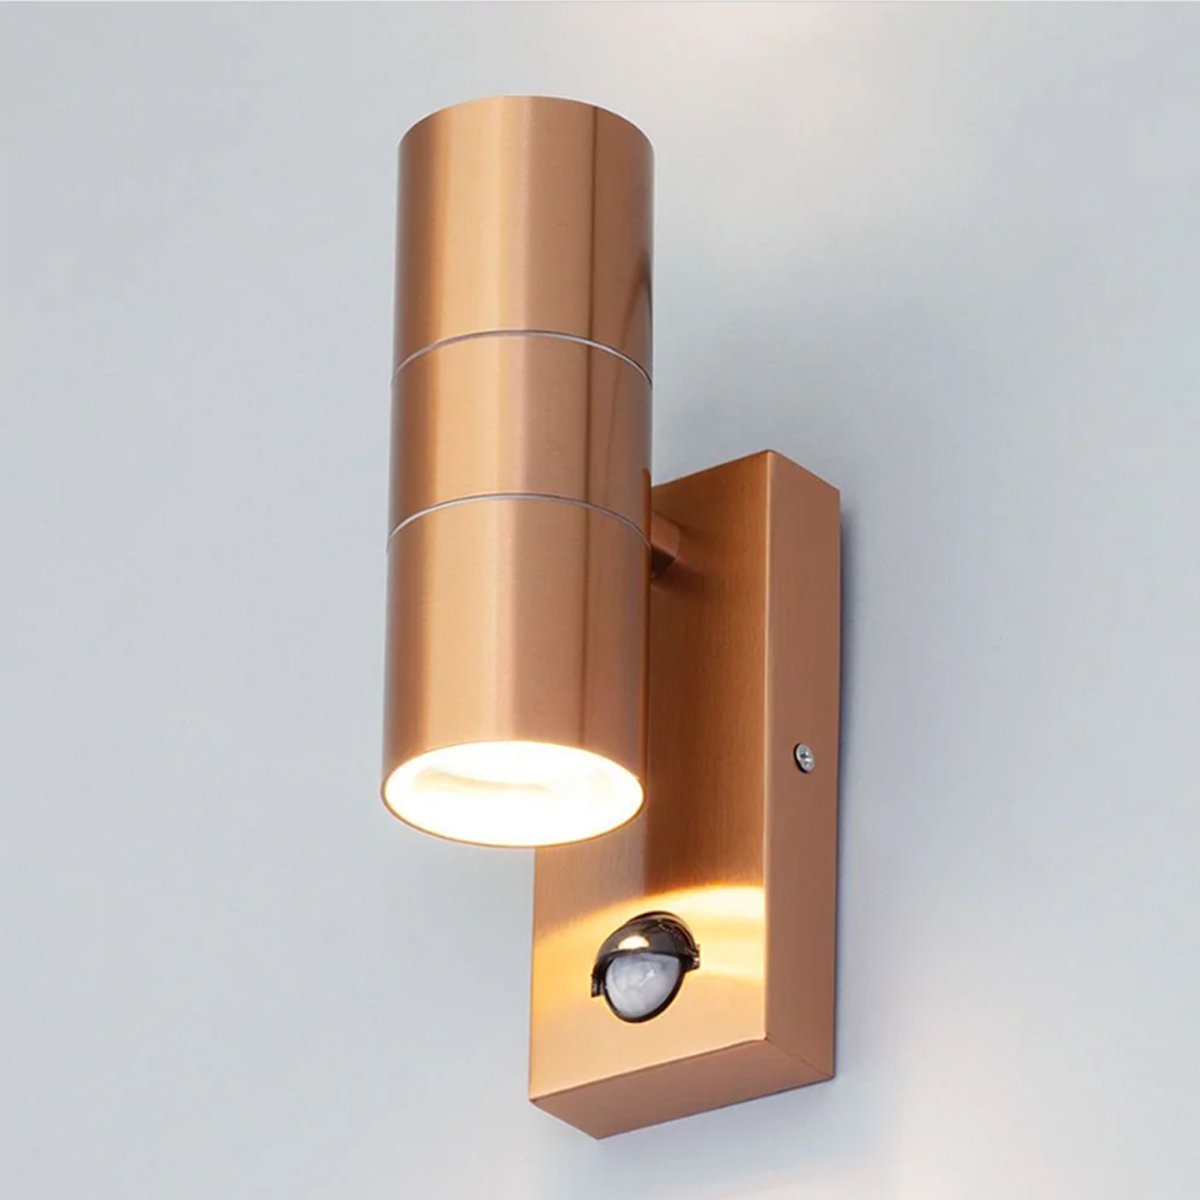 CGC MIA Copper Dual Outdoor Wall Light With Motion Sensor